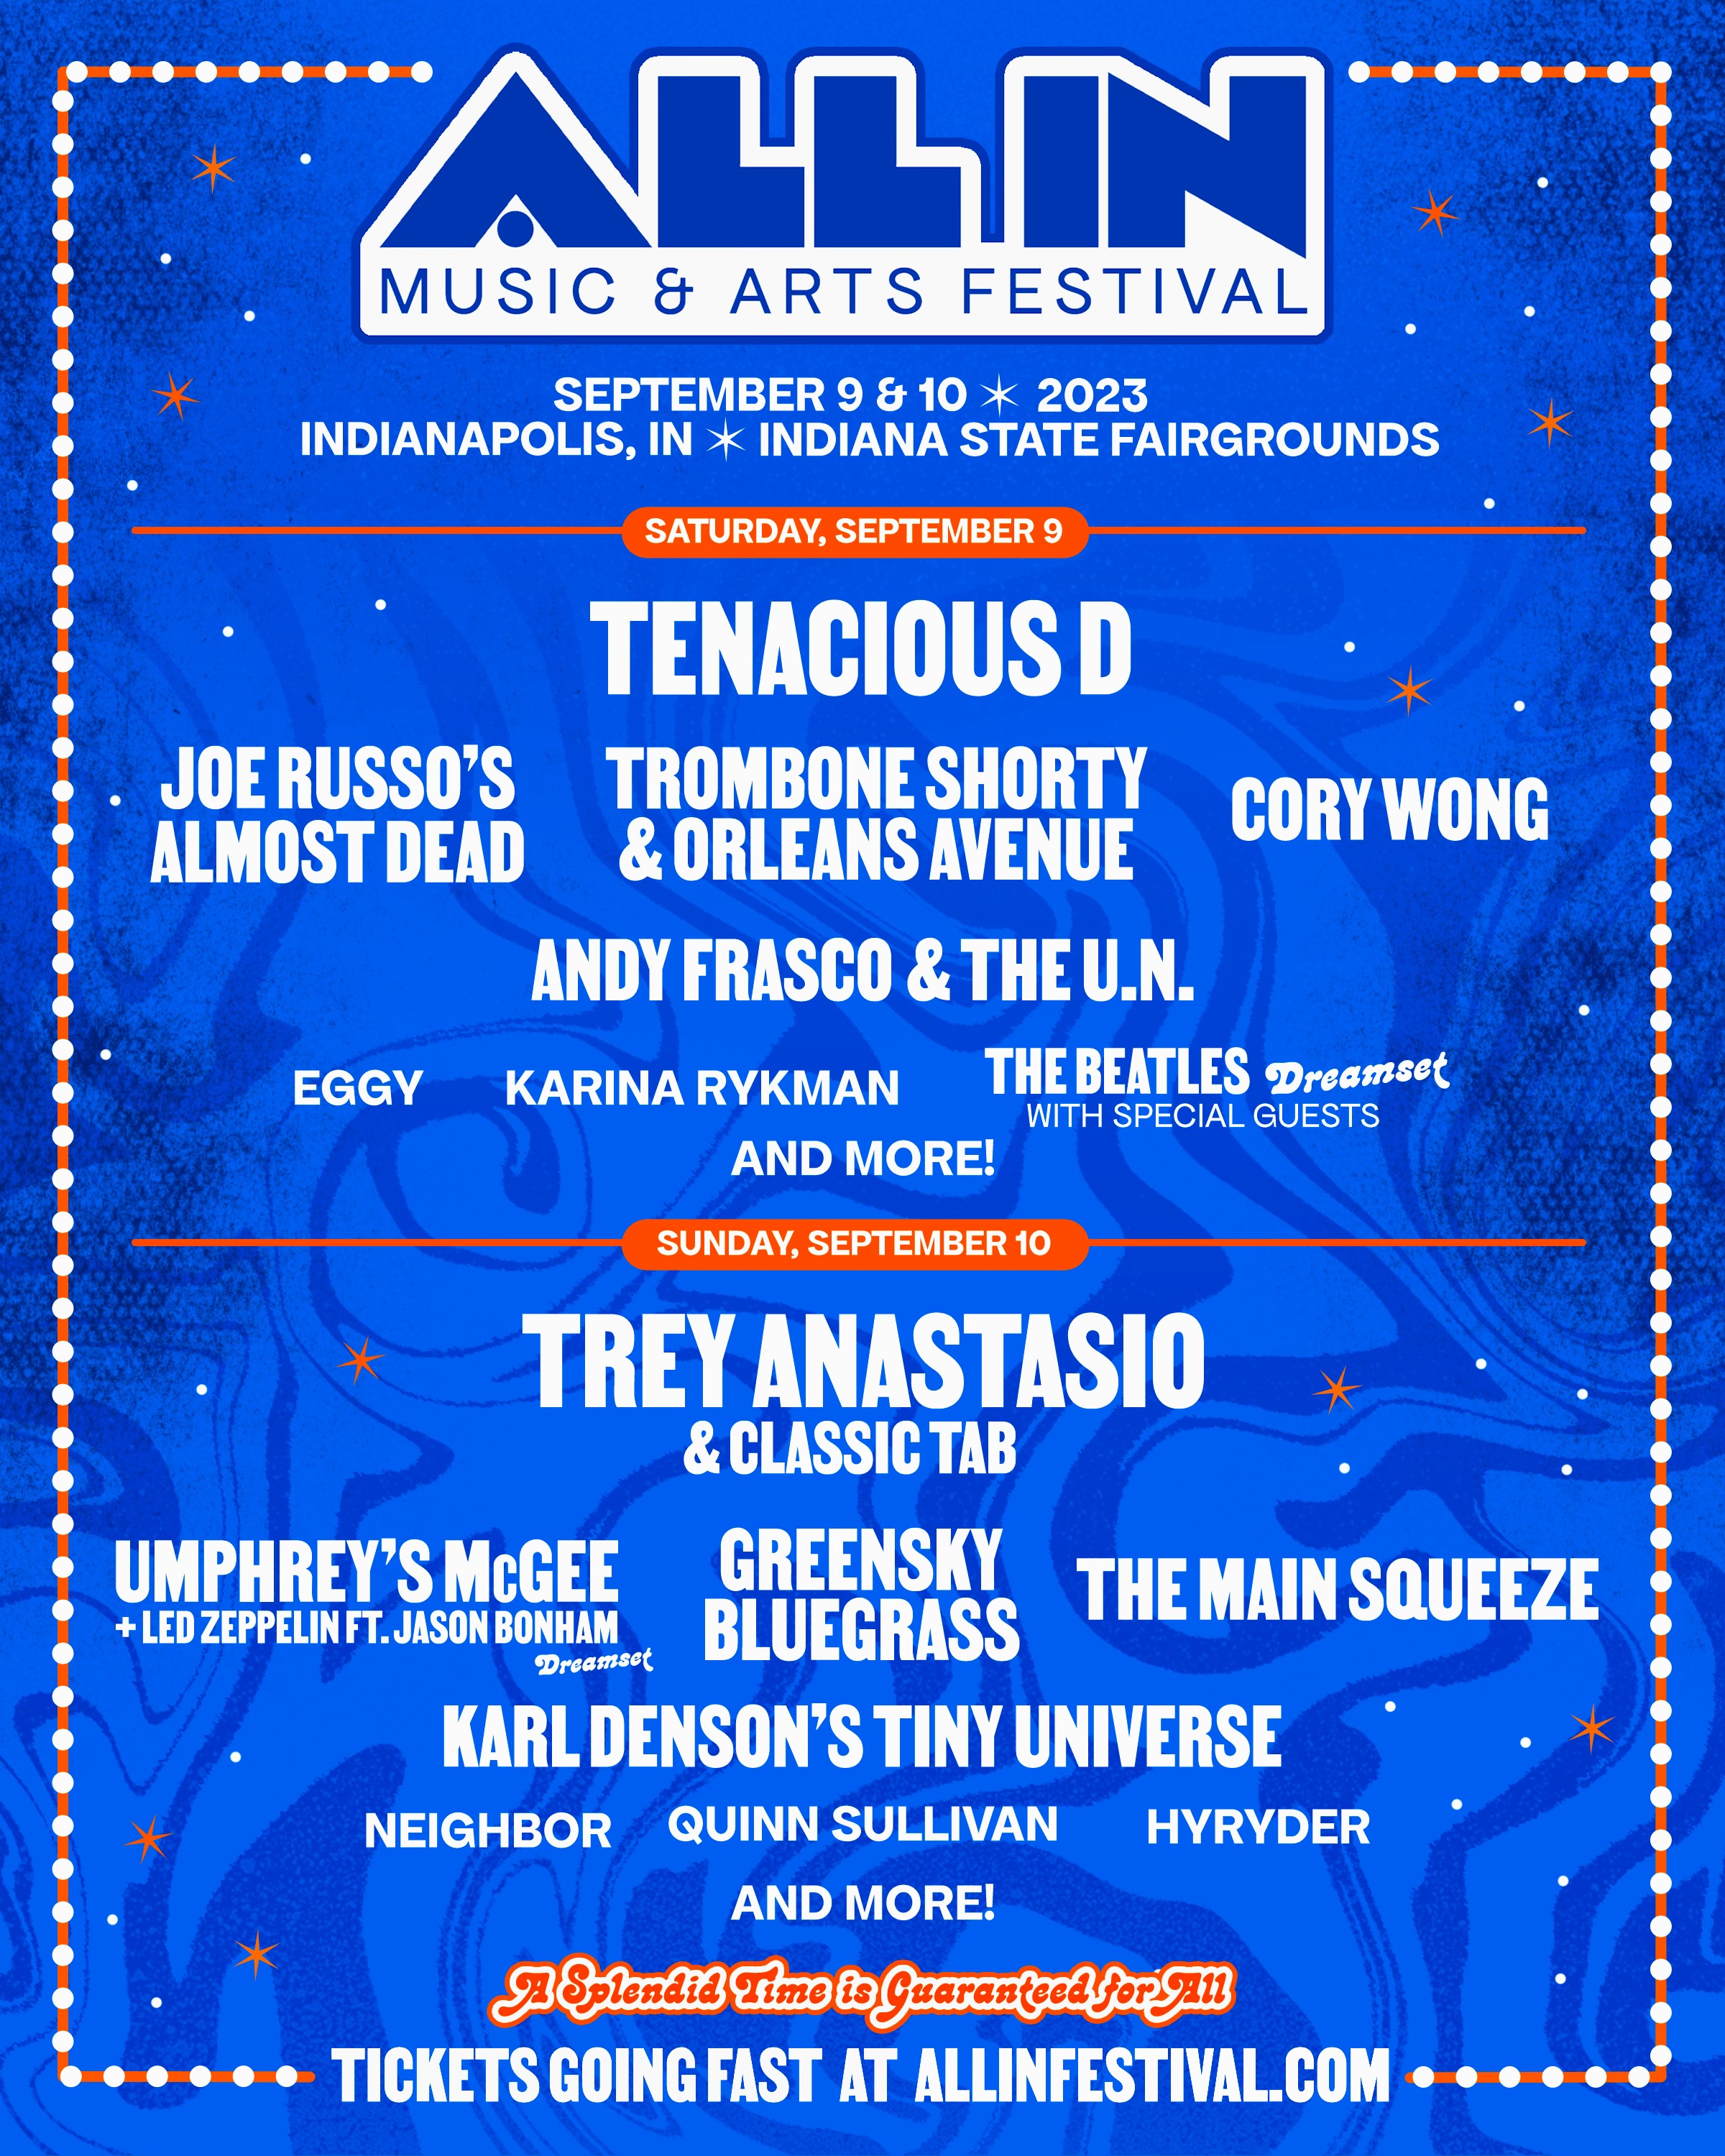 Single Day Lineup and Single Day Tickets Announced for ALL IN Music & Arts Festival in Indy this Sept